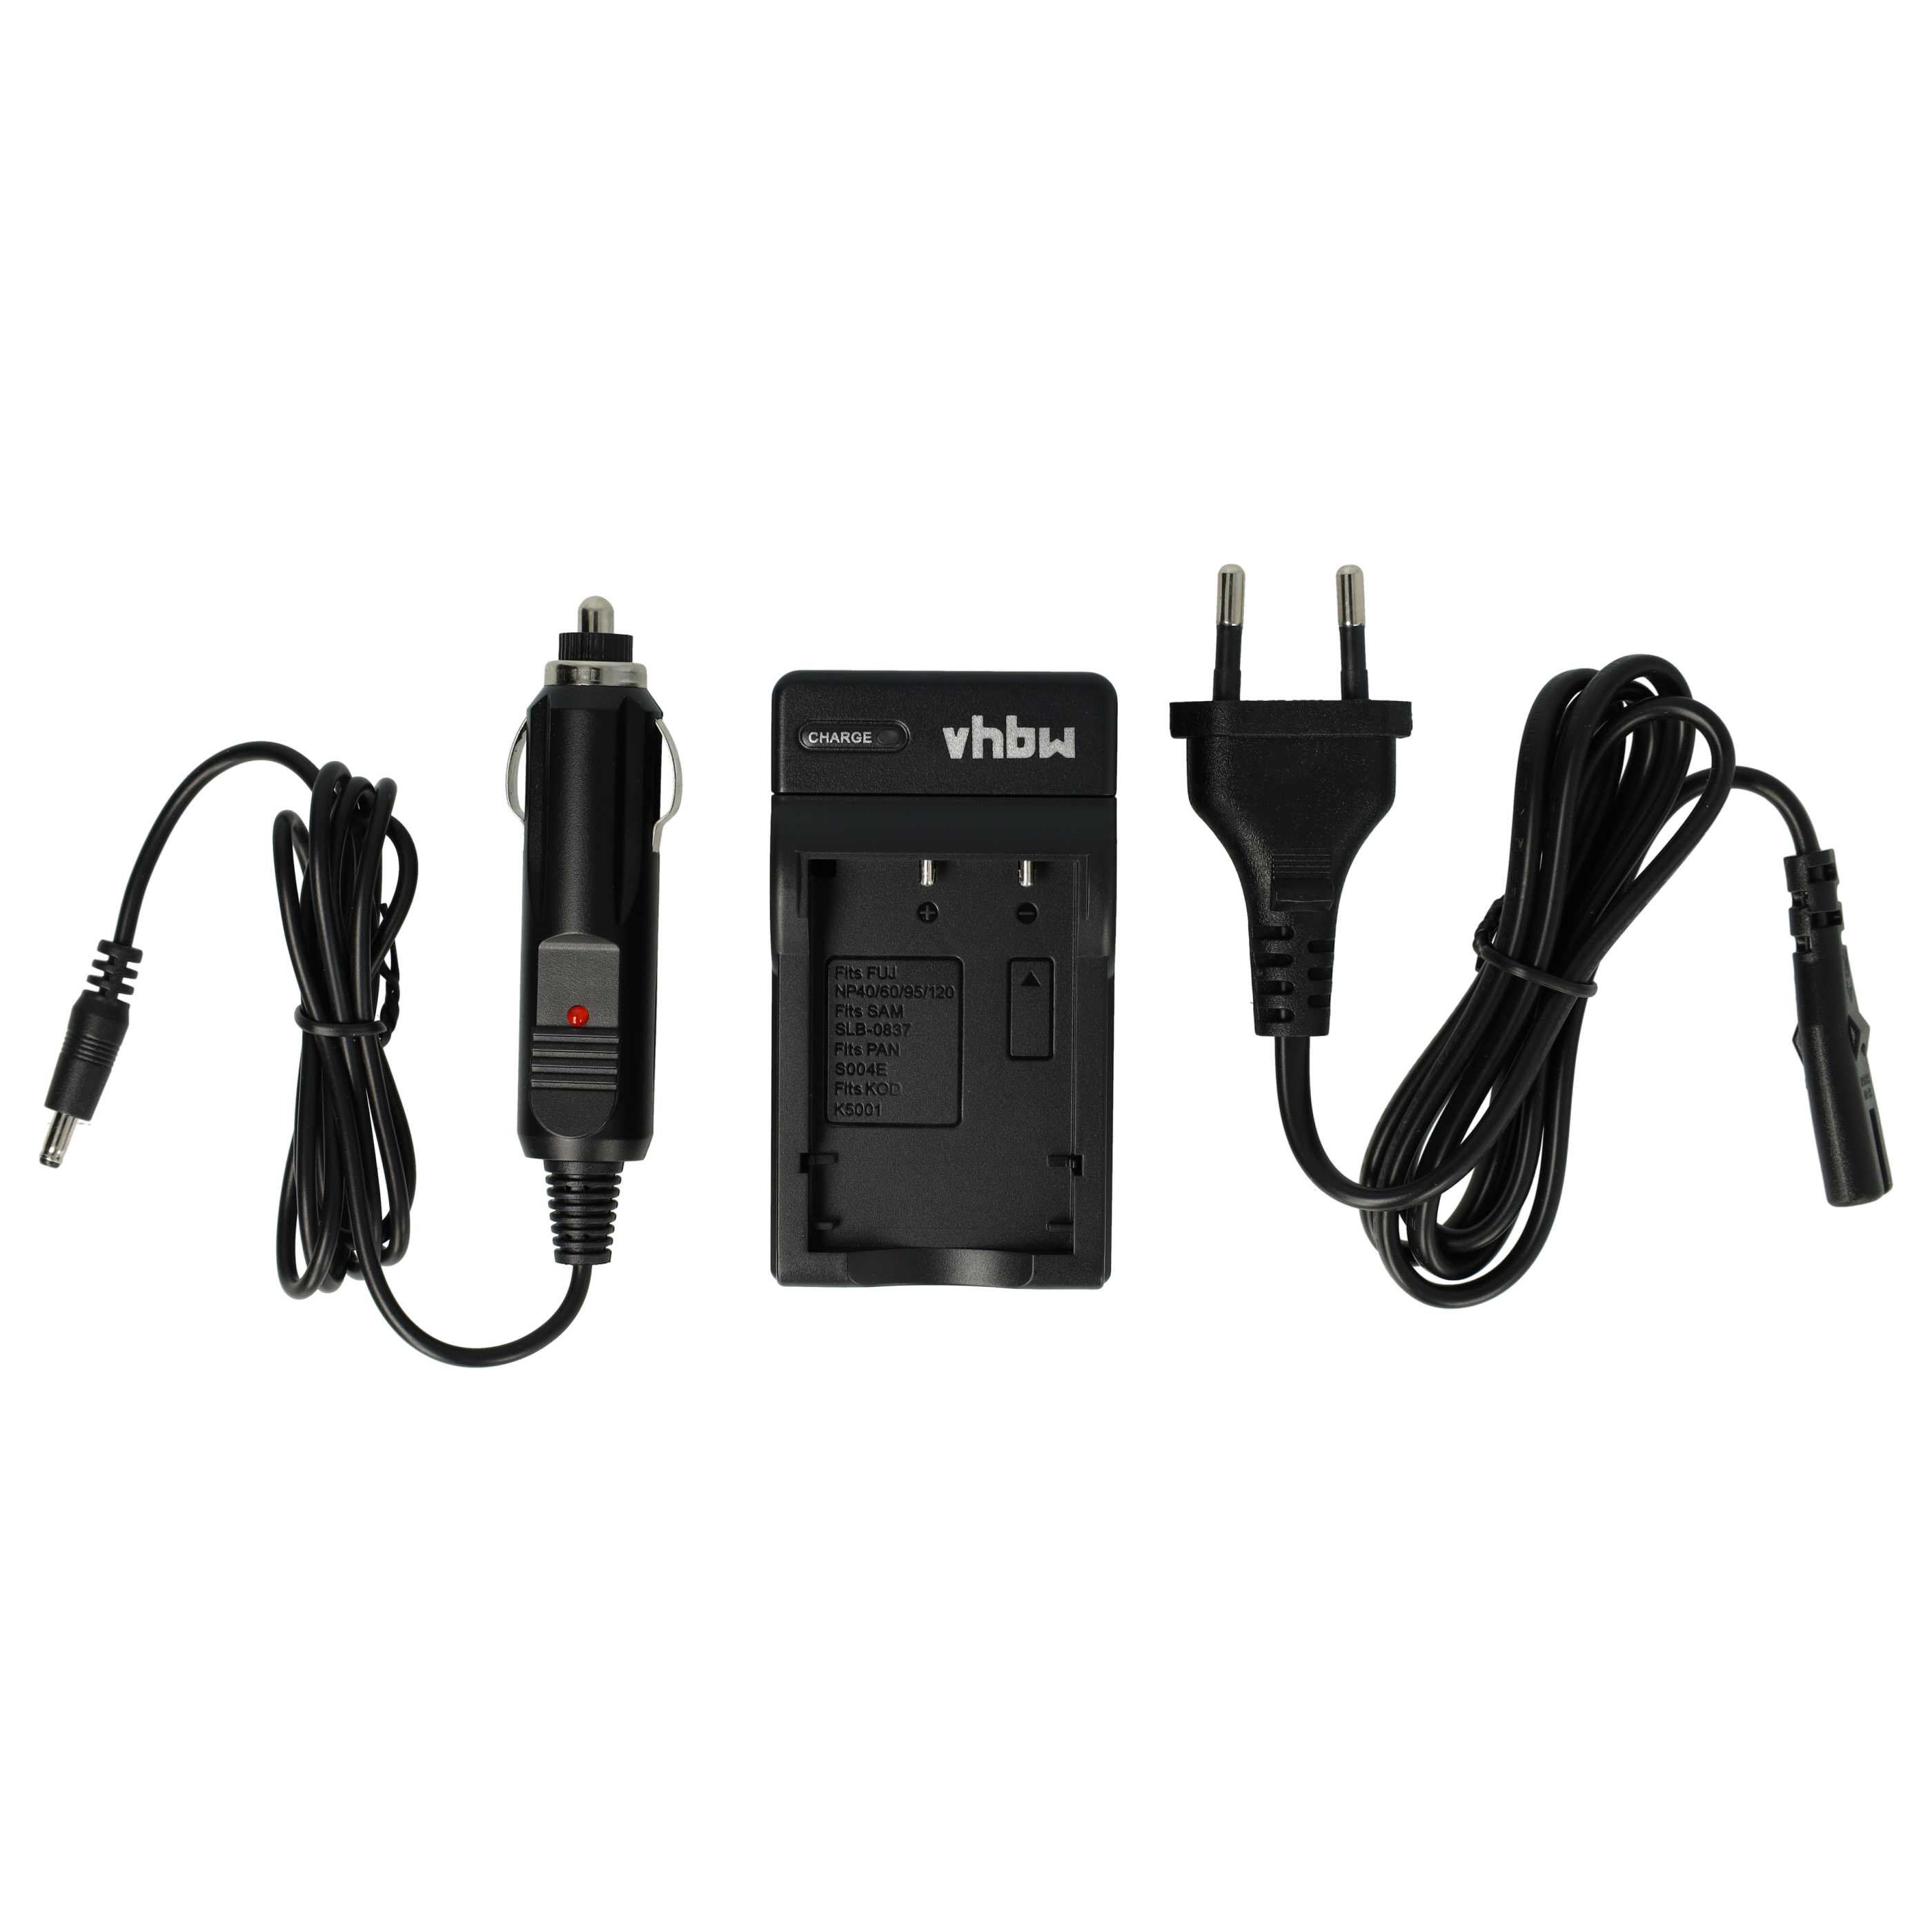 Battery Charger suitable for Sanyo DB-L50 Camera etc. - 0.6 A, 8.4 V